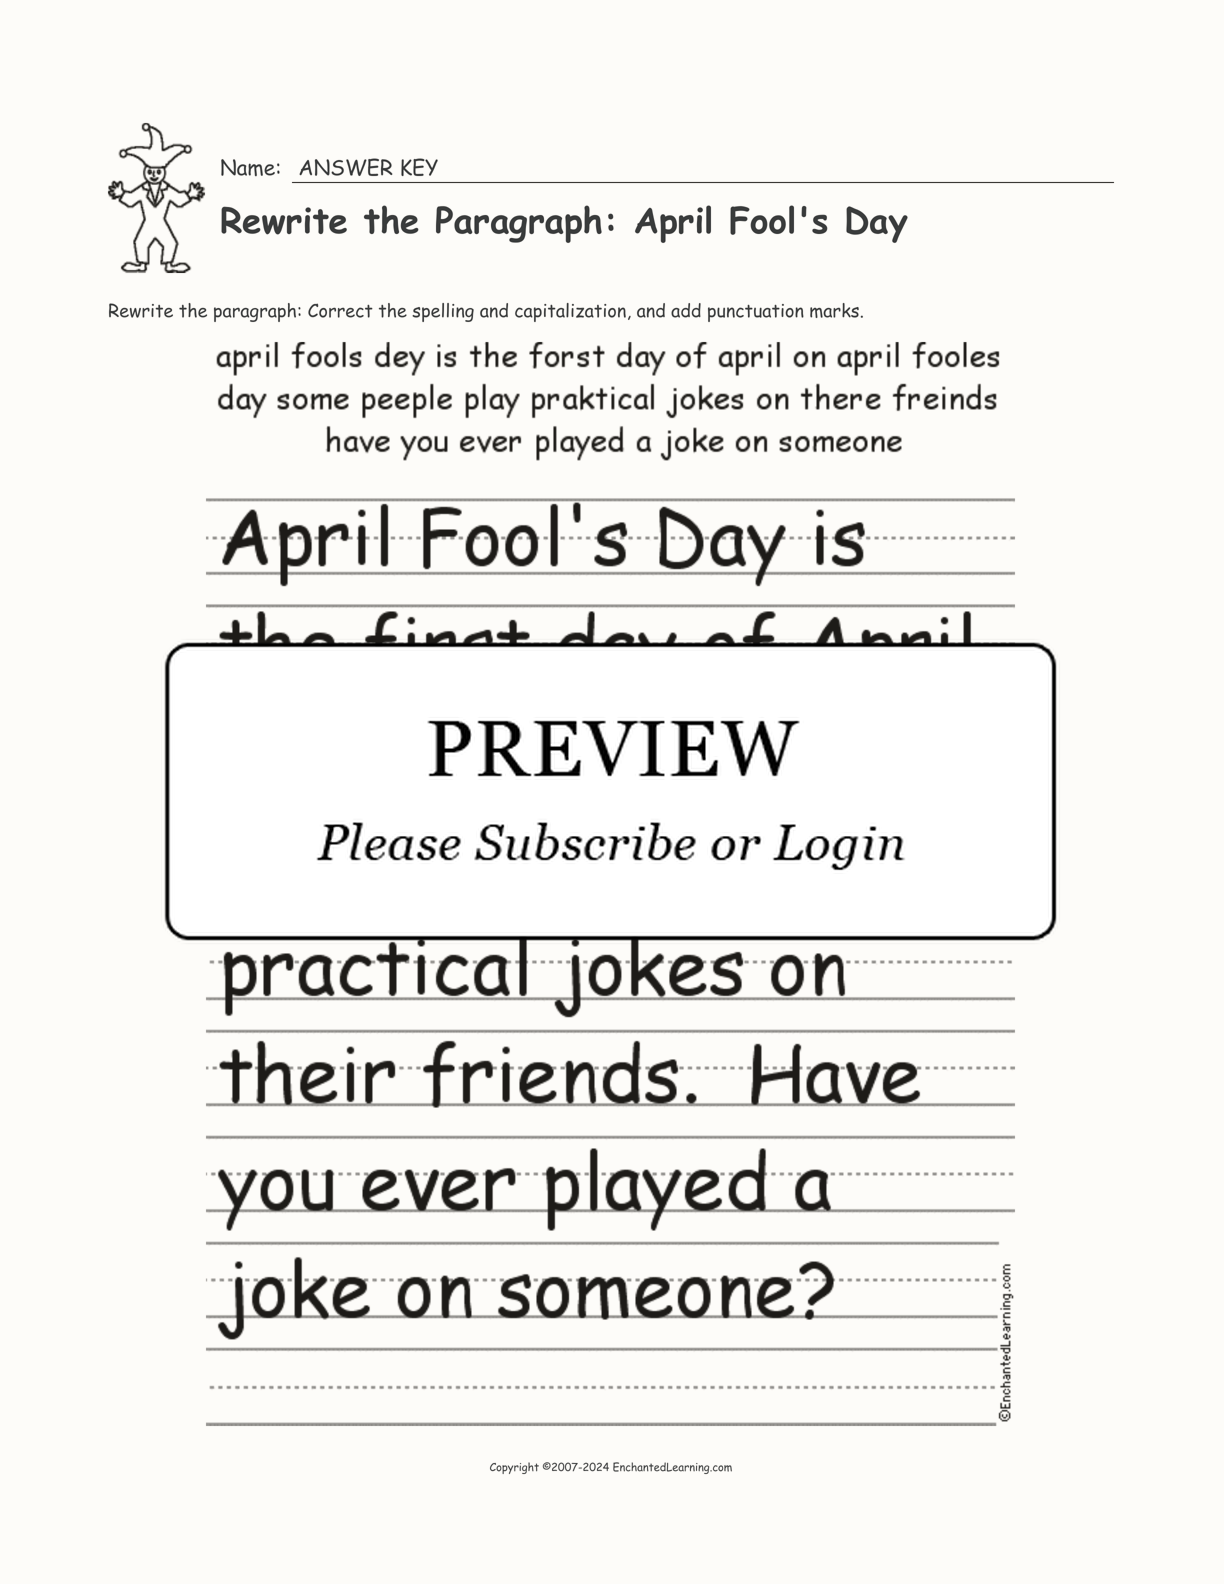 Rewrite the Paragraph: April Fool's Day interactive worksheet page 2